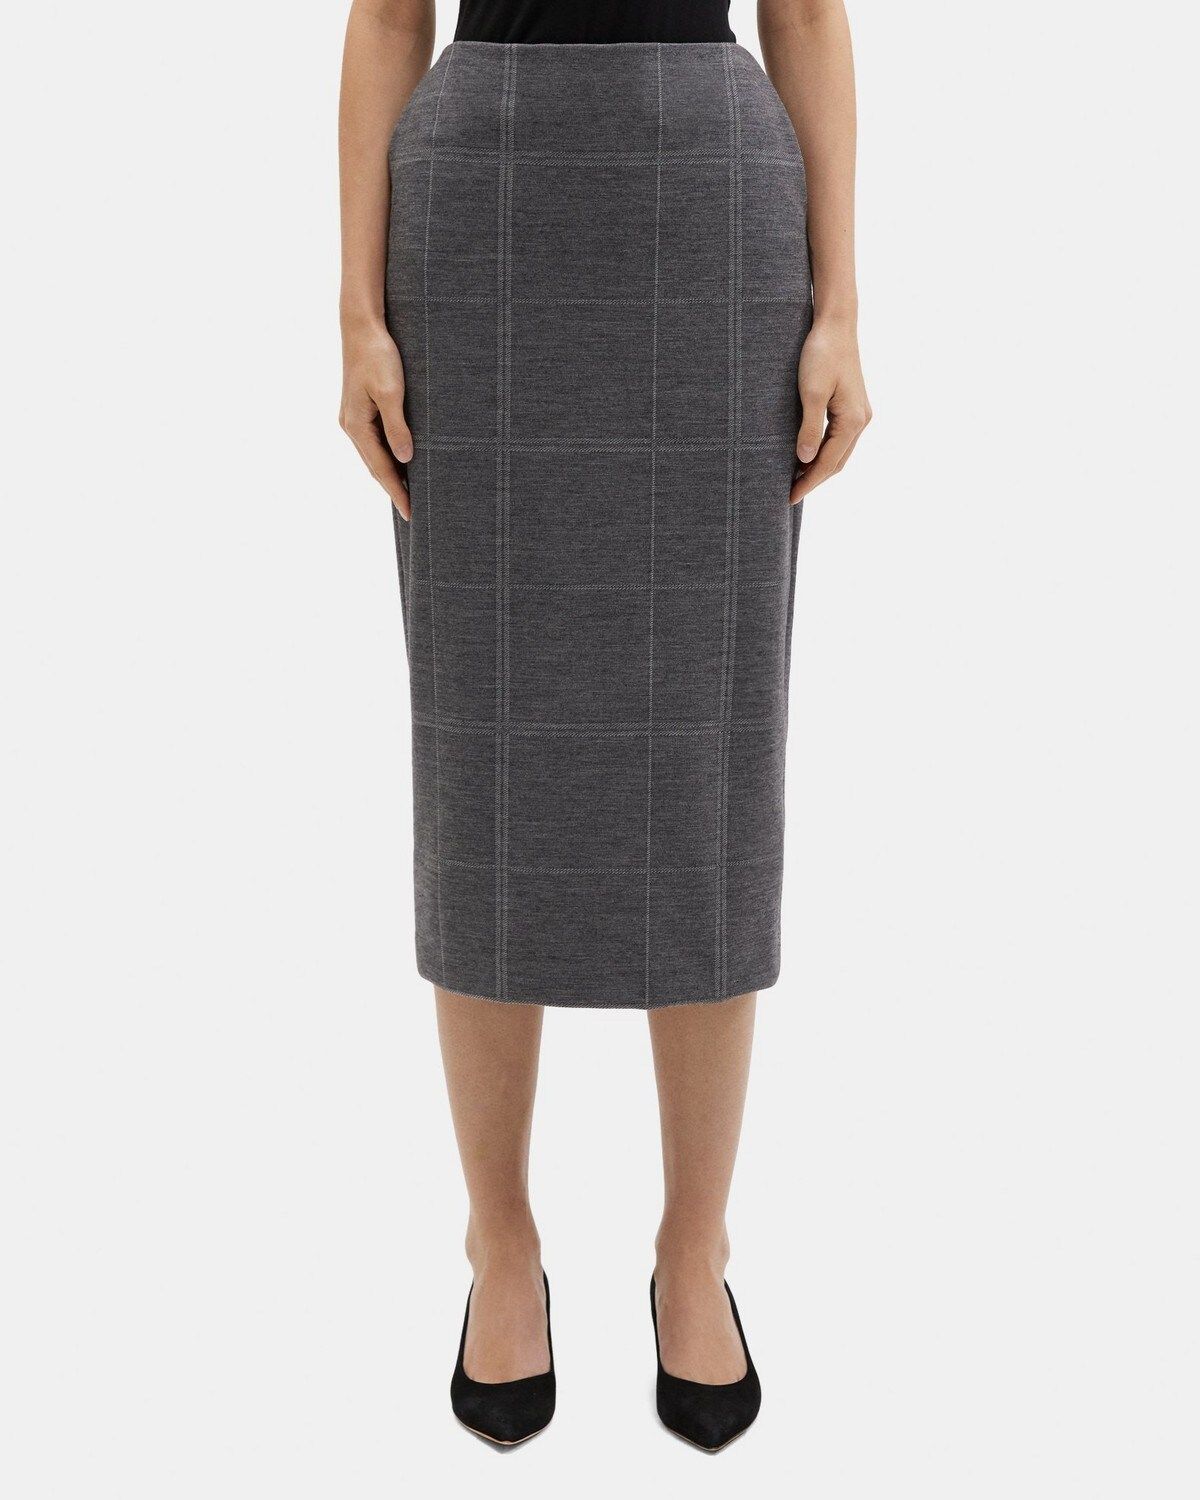 High-Waist Pencil Skirt in Checked Knit | Theory Outlet